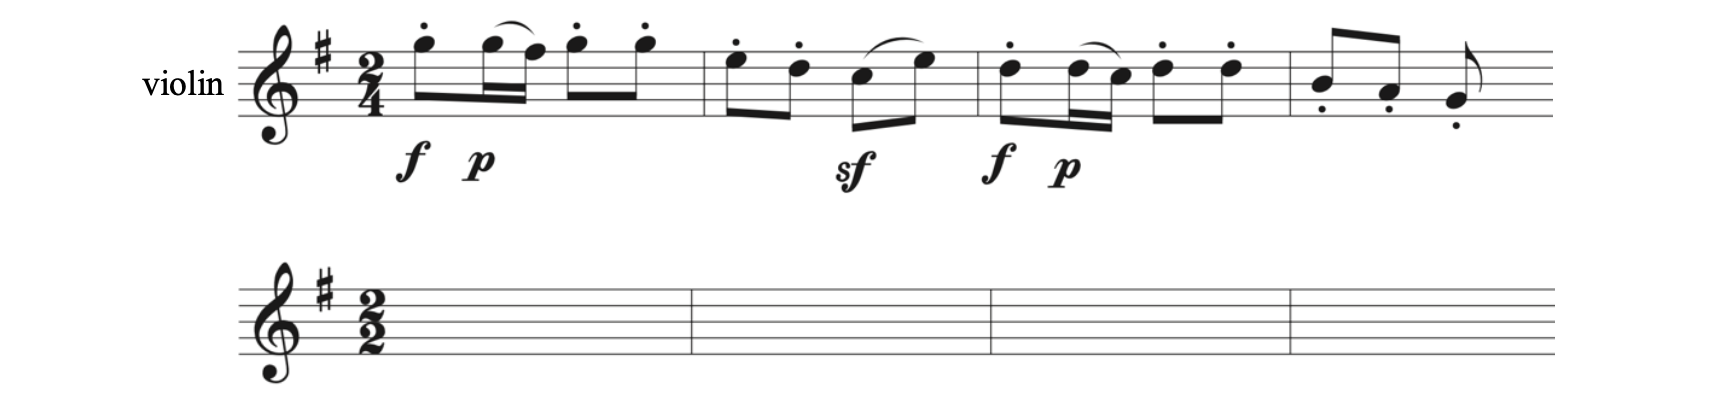 The given example is in treble clef with the time signature of 2-4. In measure 1, the notes are an eighth note on G5 beamed to a sixteenth note on G5 and a sixteenth note on F-sharp 5 then two eighth notes beamed together on G5. In measure 2, the notes are an eighth note on E5 beamed to an eighth note on D5 then an eighth note on C5 beamed to an eighth note on E5. In measure 3, the notes are an eighth note on D5 beamed to a sixteenth note on D5 and a sixteenth note on C5 then two eighth notes beamed together on D5. In measure 4, an eighth note on B4 is beamed to an eighth note on A4 followed by an eighth note on G4 by itself. Rewrite the given rhythm in 2-2.